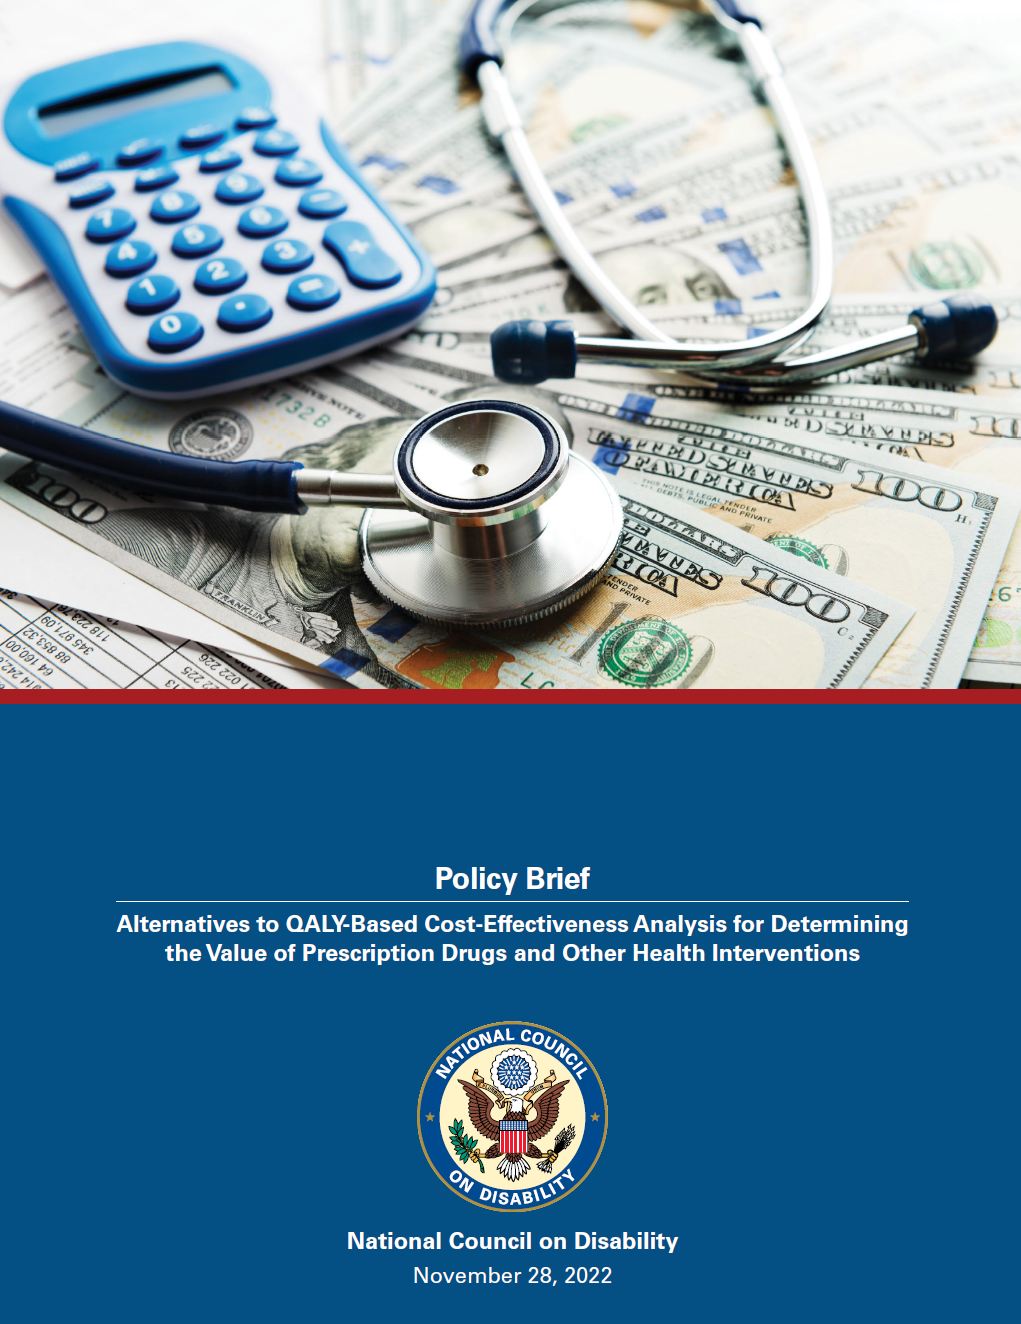 Report cover with photo of calculator and stethoscope over money. A blue rectangle with the report title and NCD seal are below. 